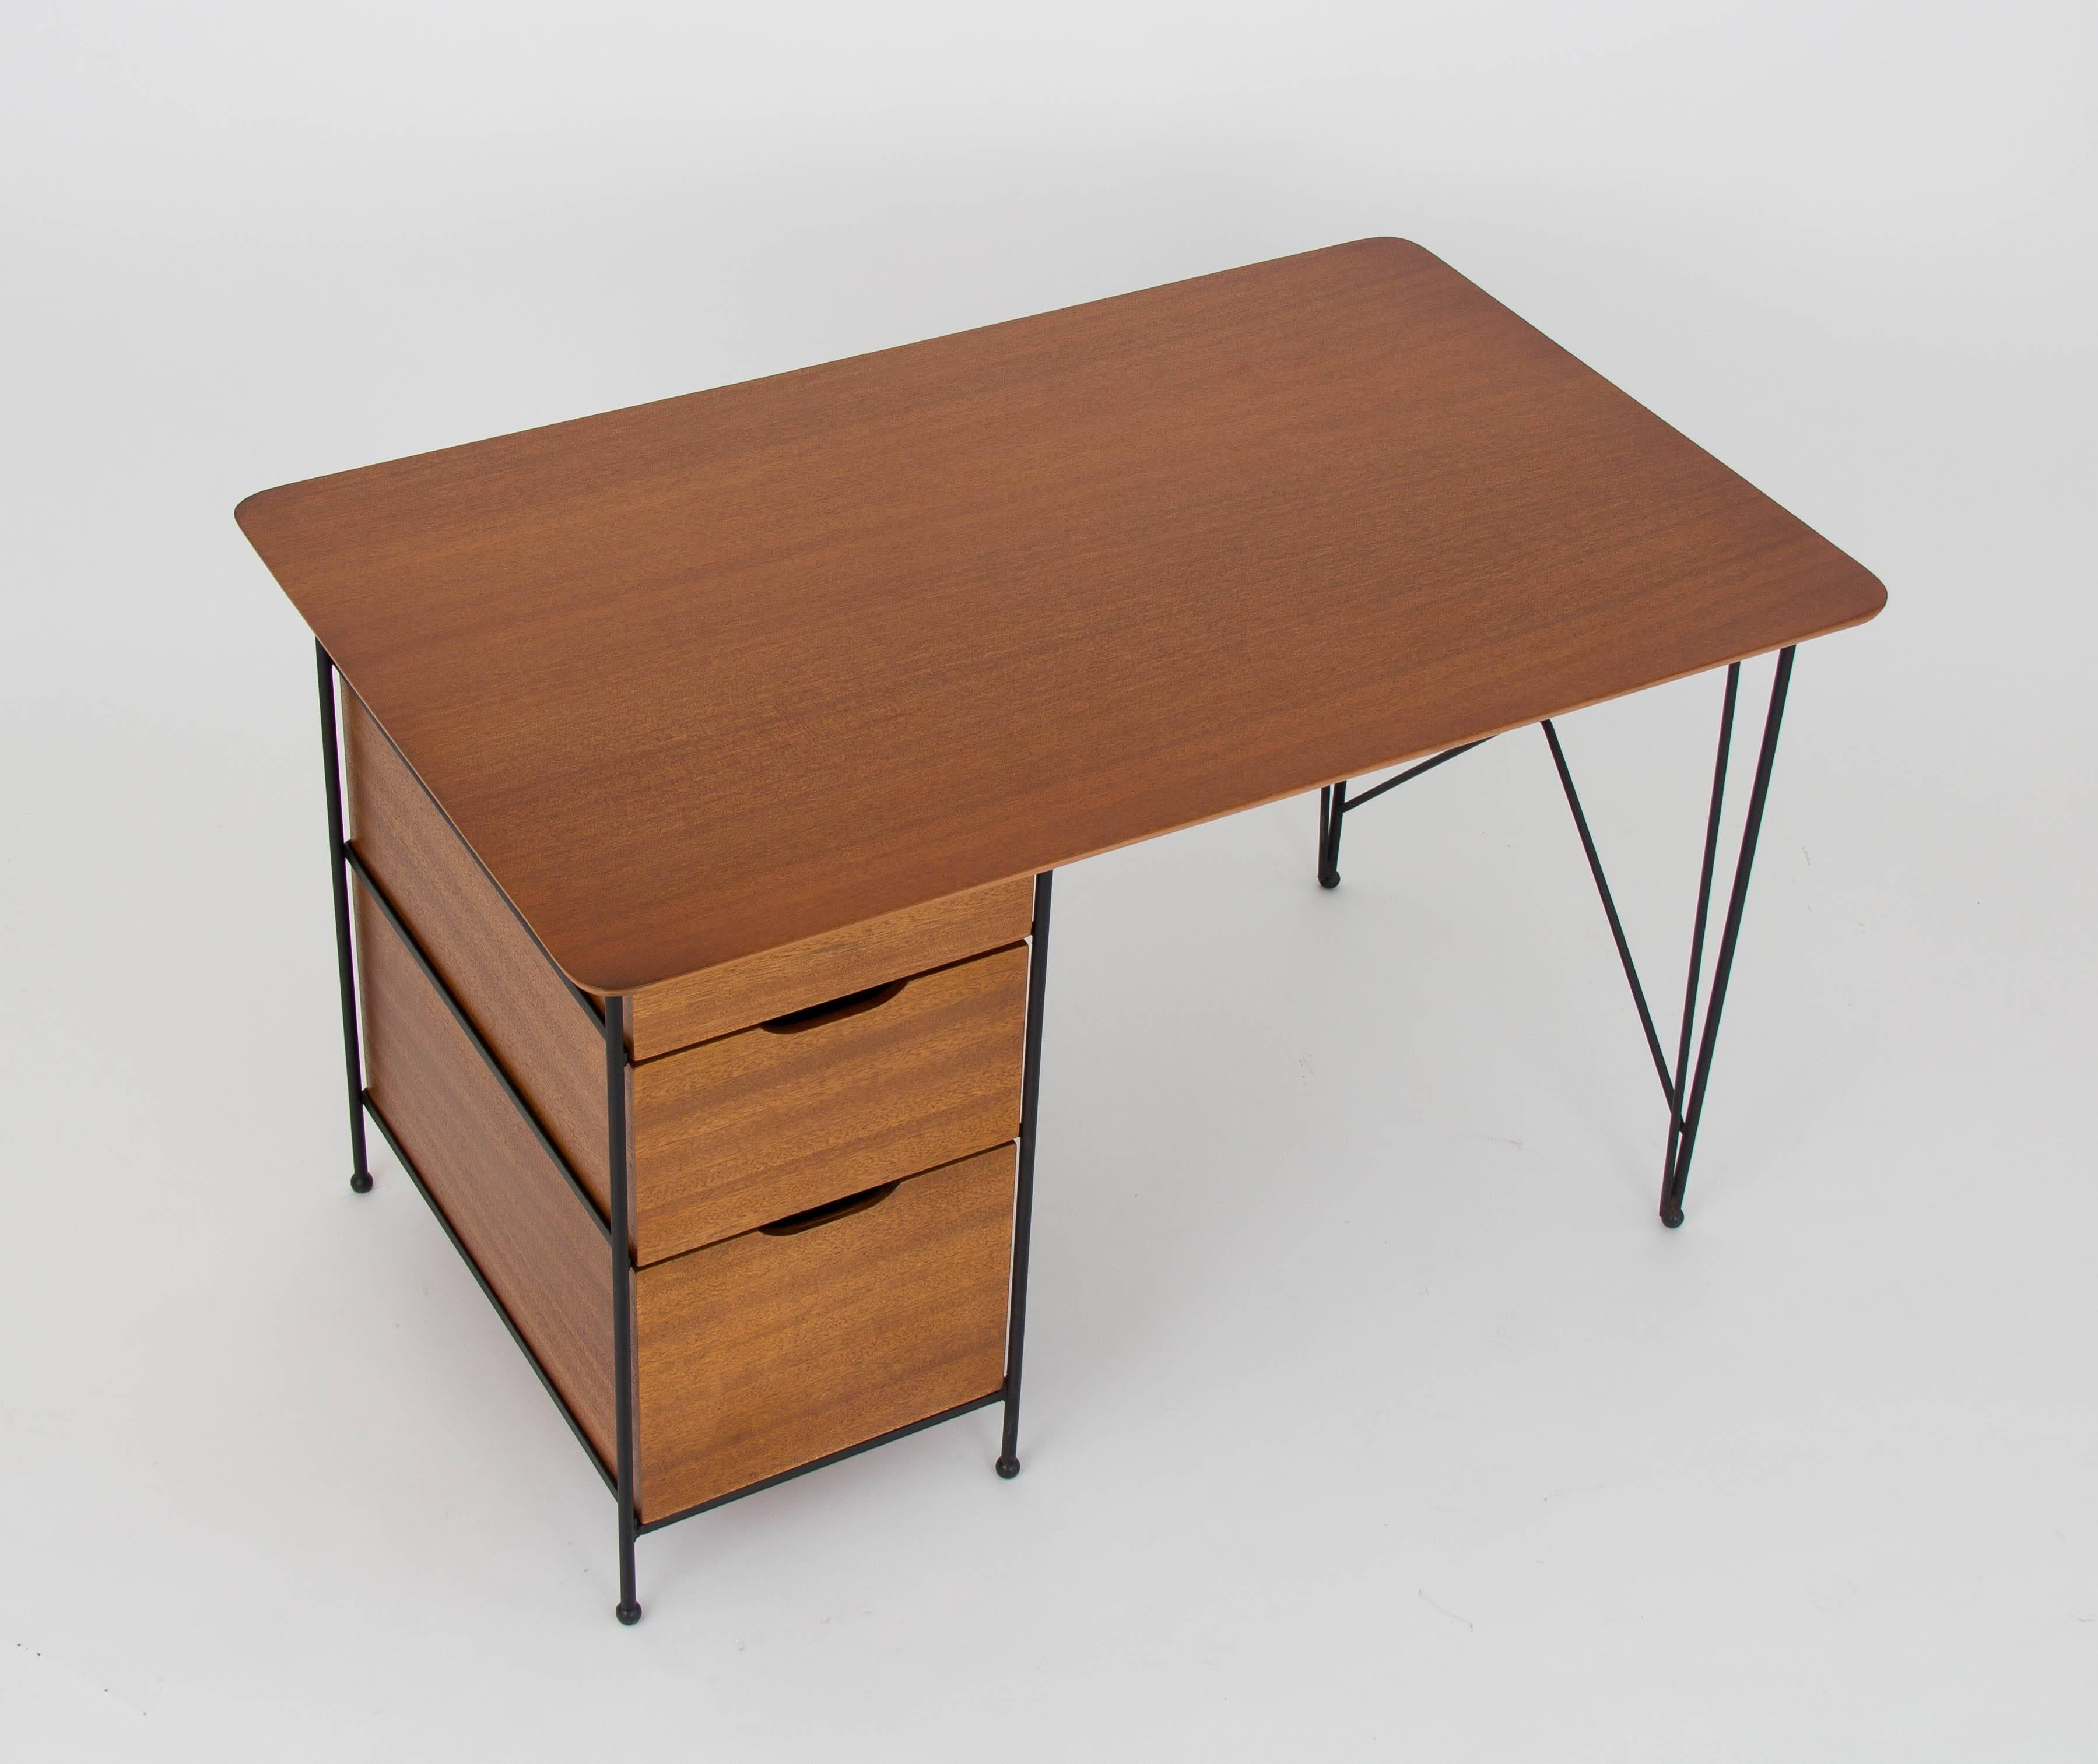 20th Century Modernist Desk in Mahogany and Enameled Steel by Vista of California